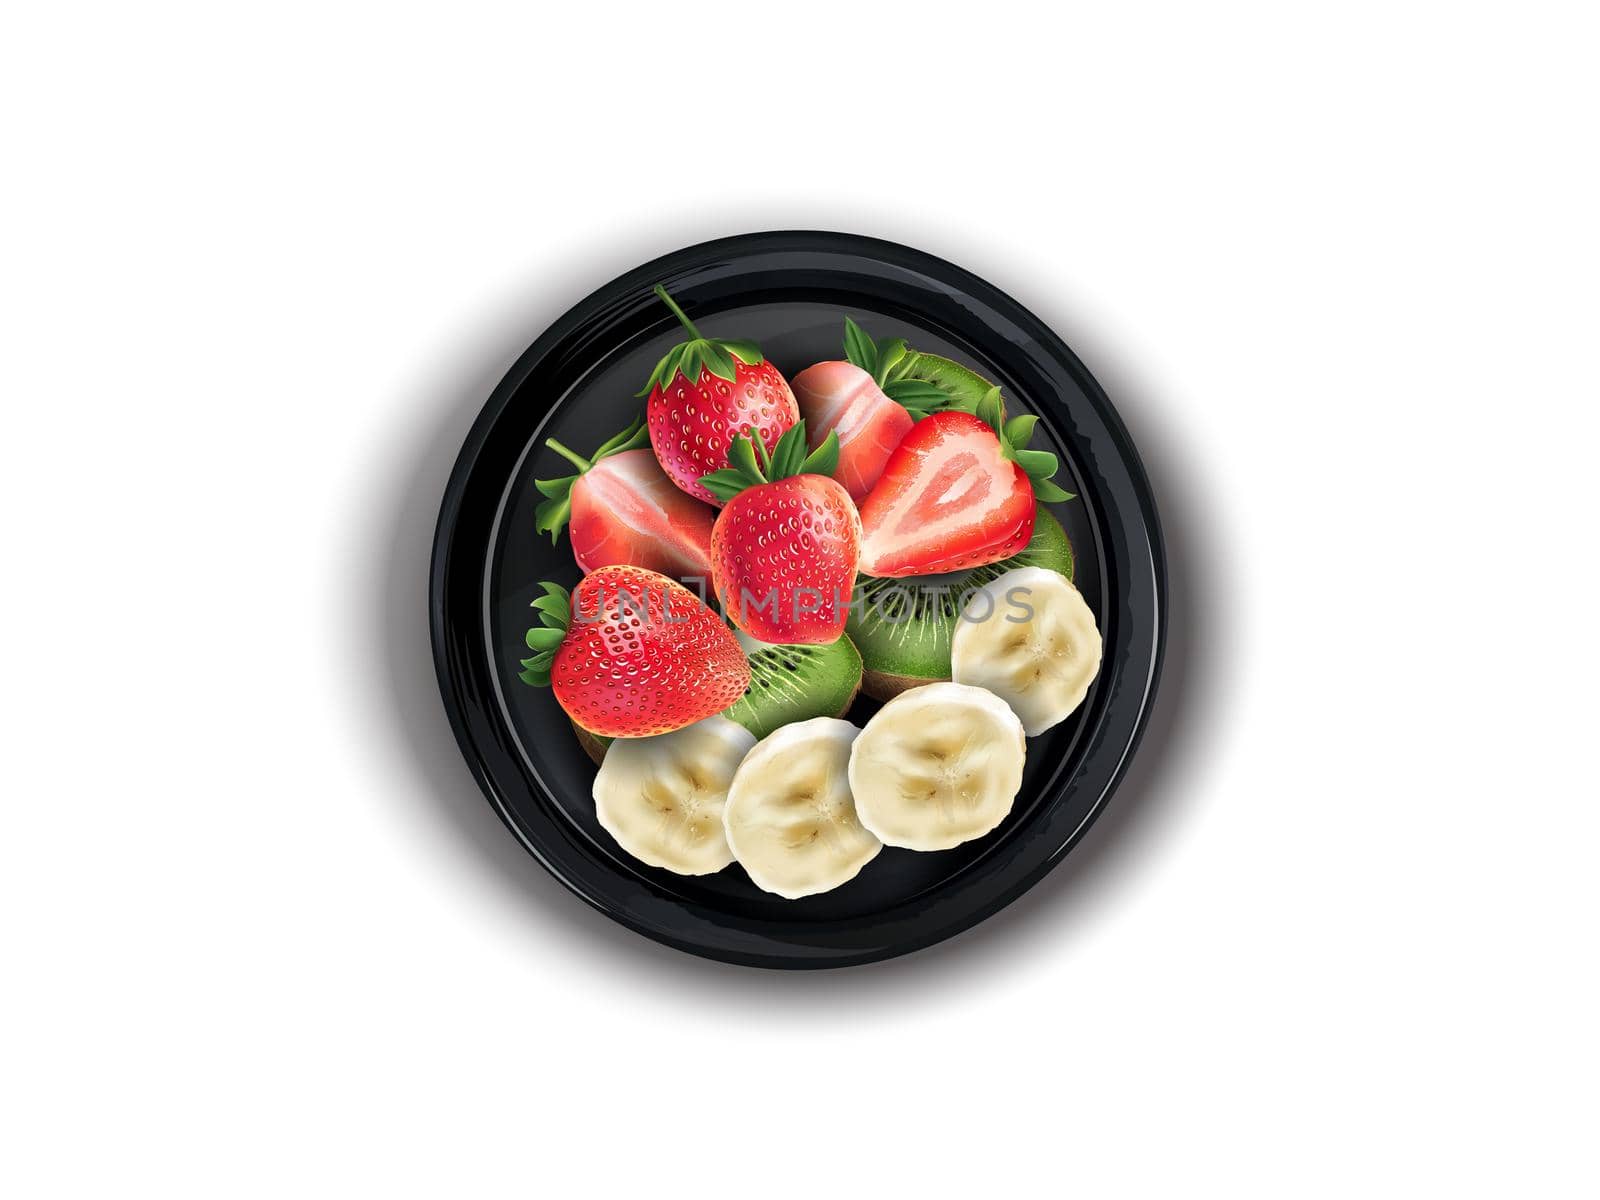 Black plate with strawberries, kiwi and banana slices on a white background, top view. Realistic style illustration.